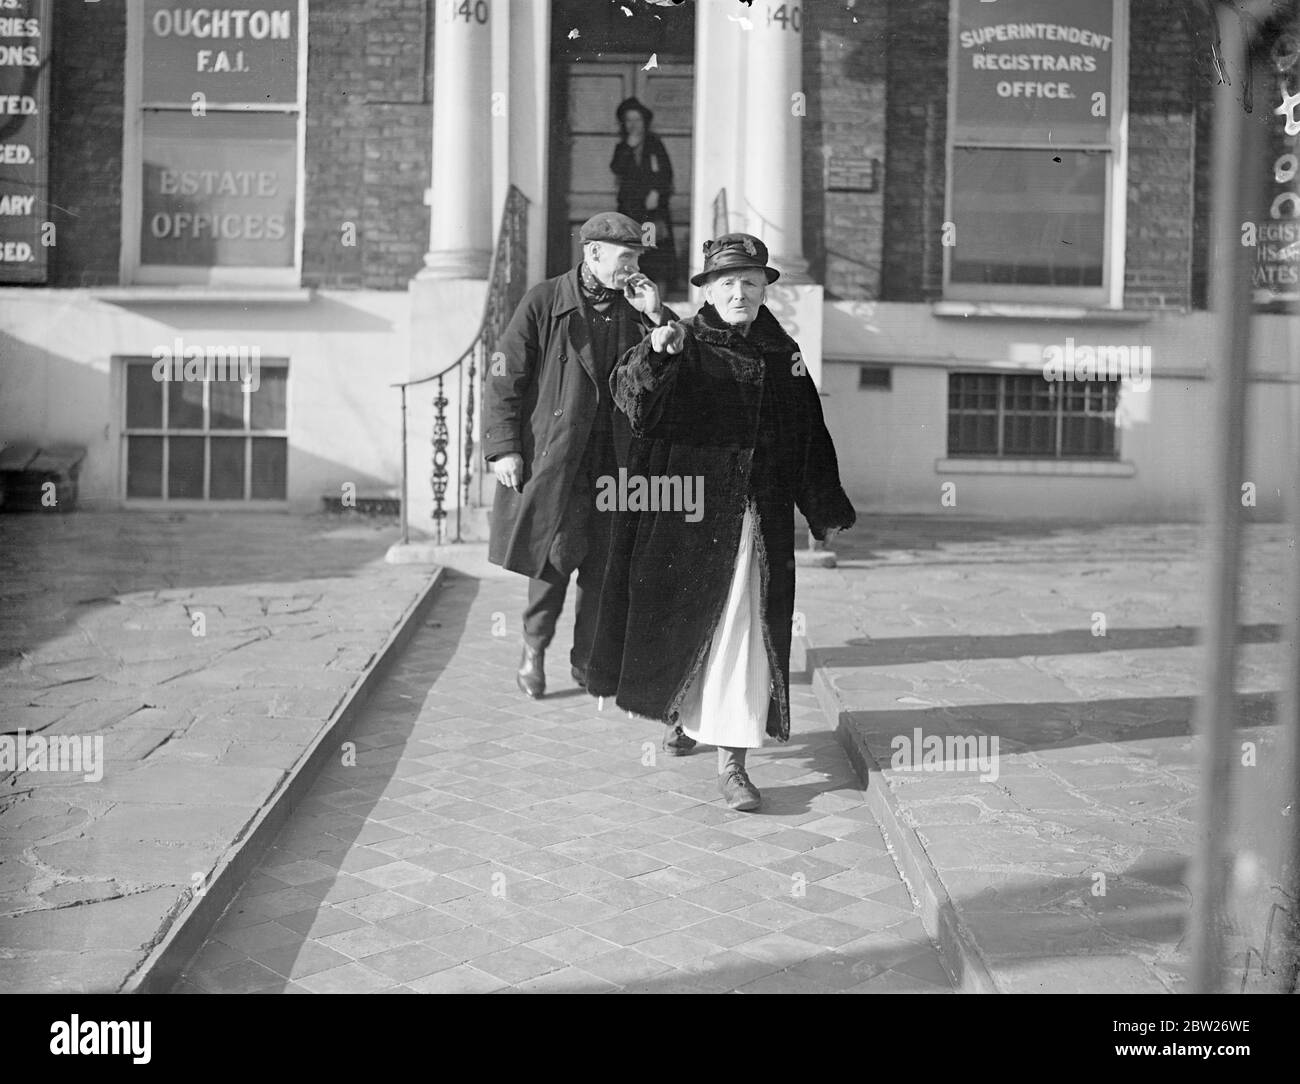 Friends of 51 years married at London register office. Mr Henry Bailey, a Kennington greengrocer, and miss Mary Ann Kitchener, who have known each other for 51 years and have been neighbours for most of that time, were married at Lambeth register office. Photo shows, Mr Henry Bailey and his bride, leaving the register office, after their wedding. 24 January 1938 Stock Photo